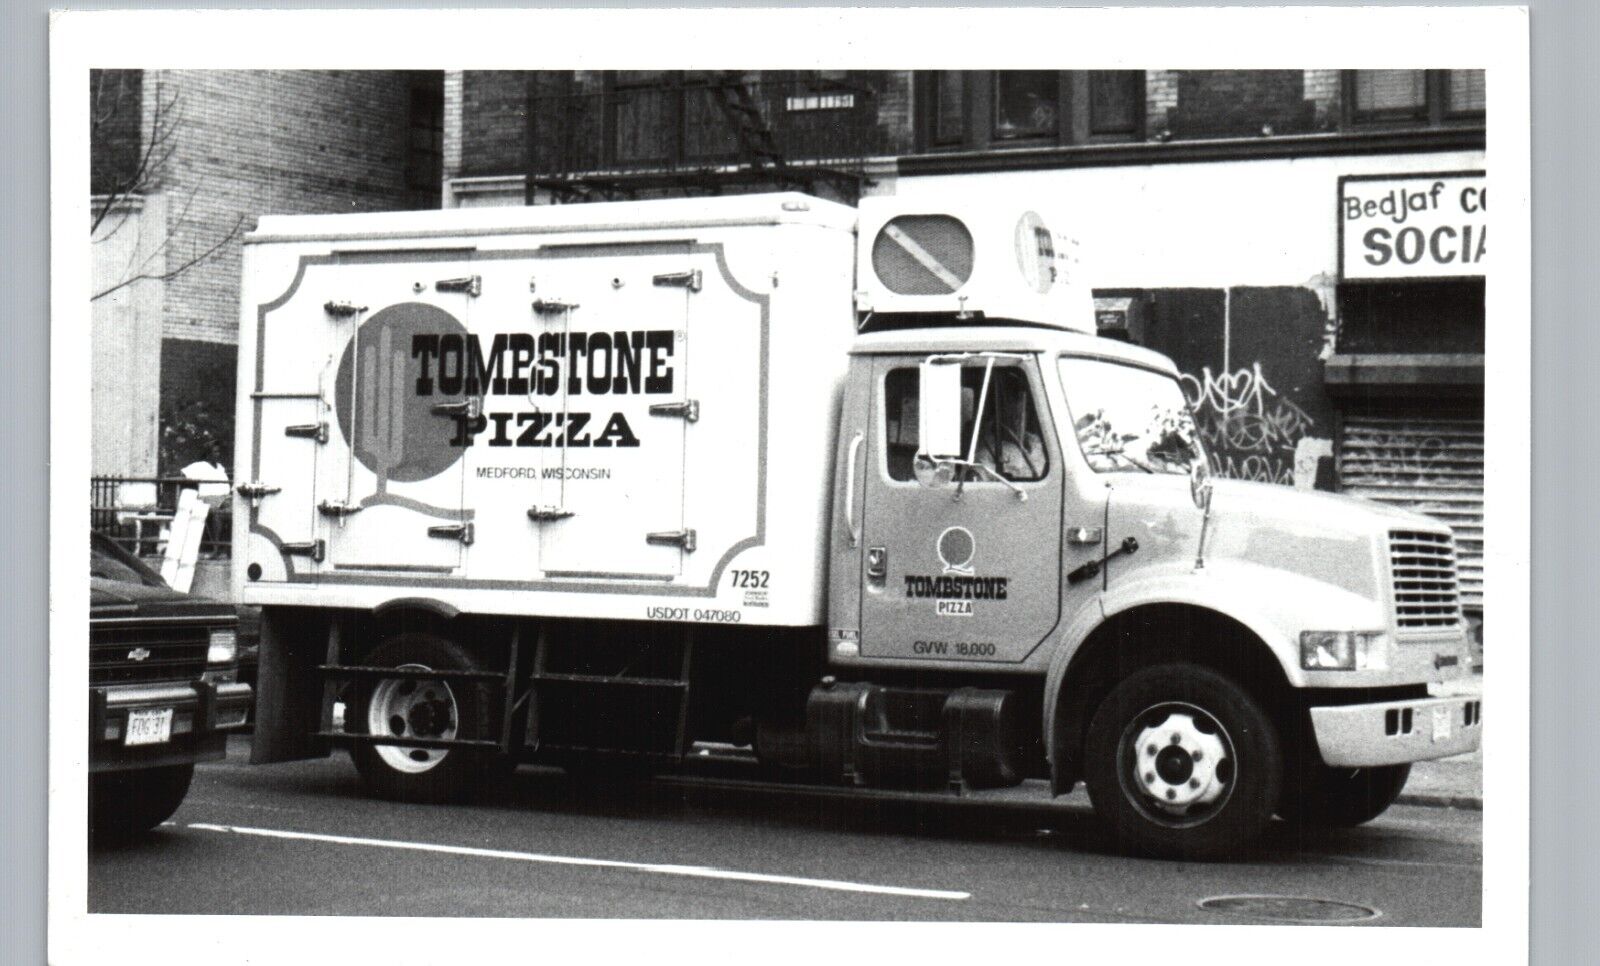 TOMBSTONE PIZZA DELIVERY TRUCK 1990s real photo postcard rppc medford wi nyc ny